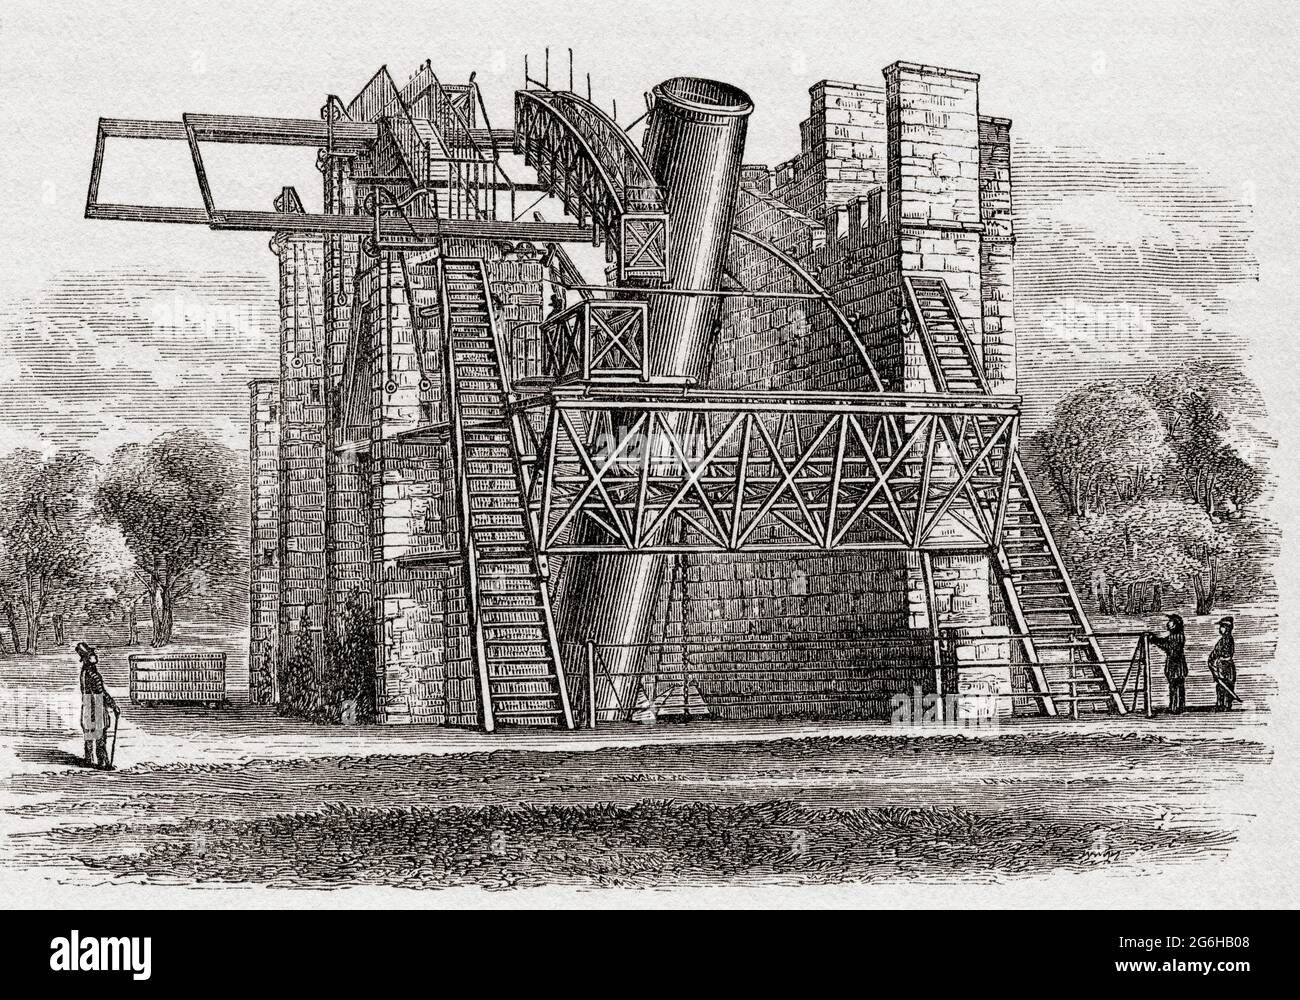 The Leviathan of Parsonstown, the 72 inch telescope built by William Parsons, 3rd Earl of Rosse, in 1845. It was located at Birr Castle, Parsonstown, County Offaly, Ireland and was the largest telescope built in the 19th century. Parsonstown is now known as Birr. The telescope can still be seen at Ireland’s Historic Science Centre at Birr Castle.  From The Universe or, The Infinitely Great and the Infinitely Little, published 1882. Stock Photo